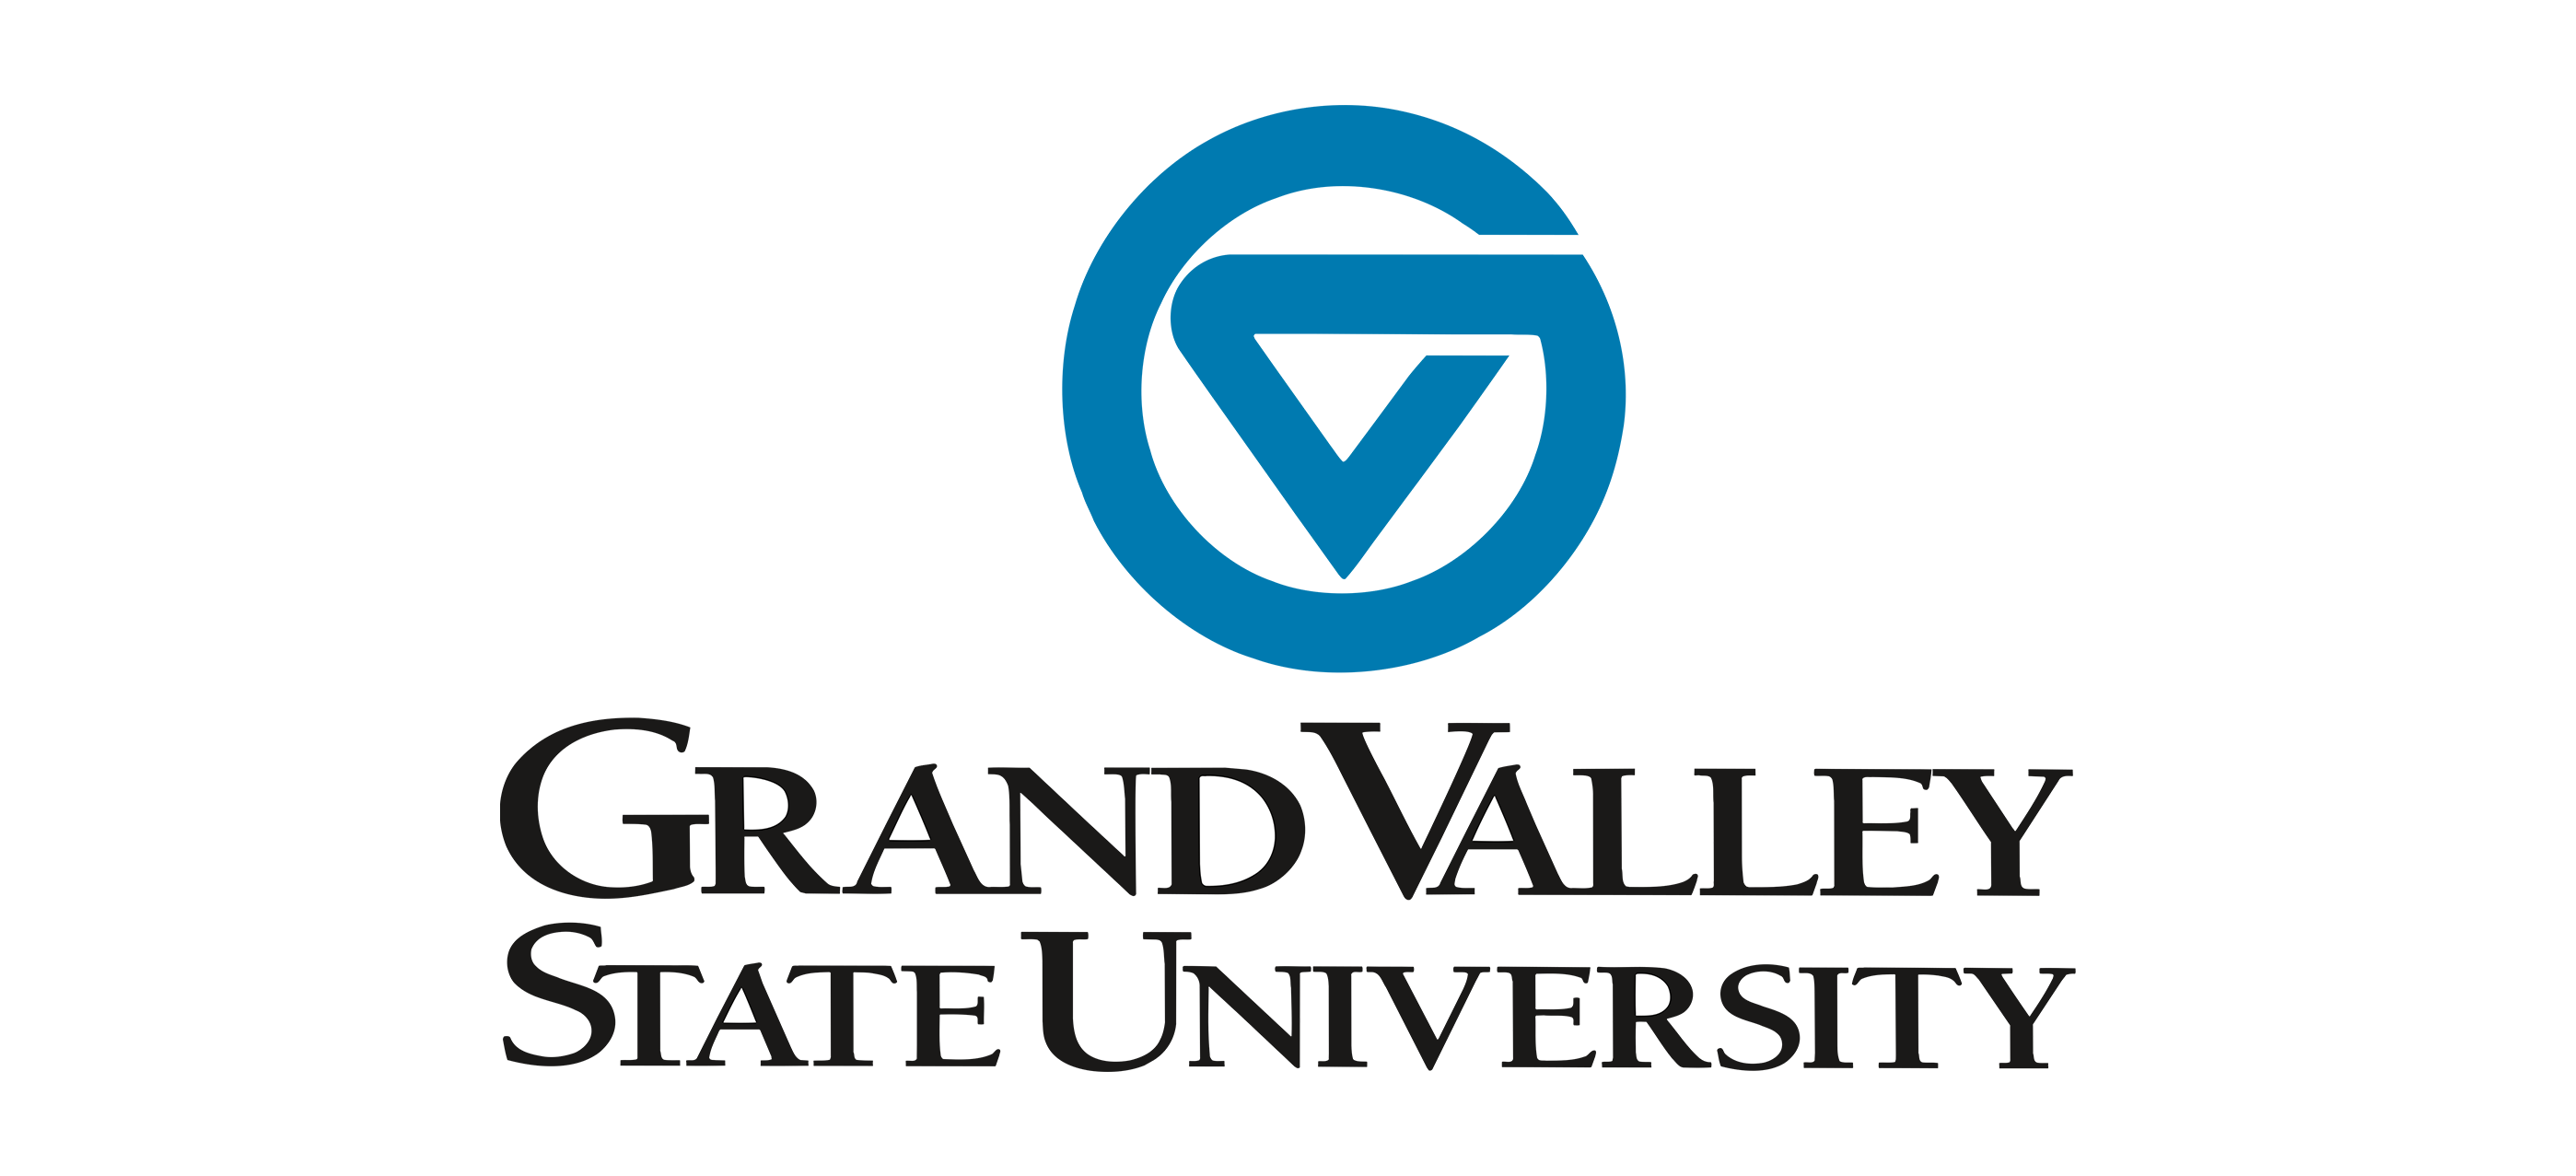 Grand-Valley-State-University-Resource-Page-Cover Image